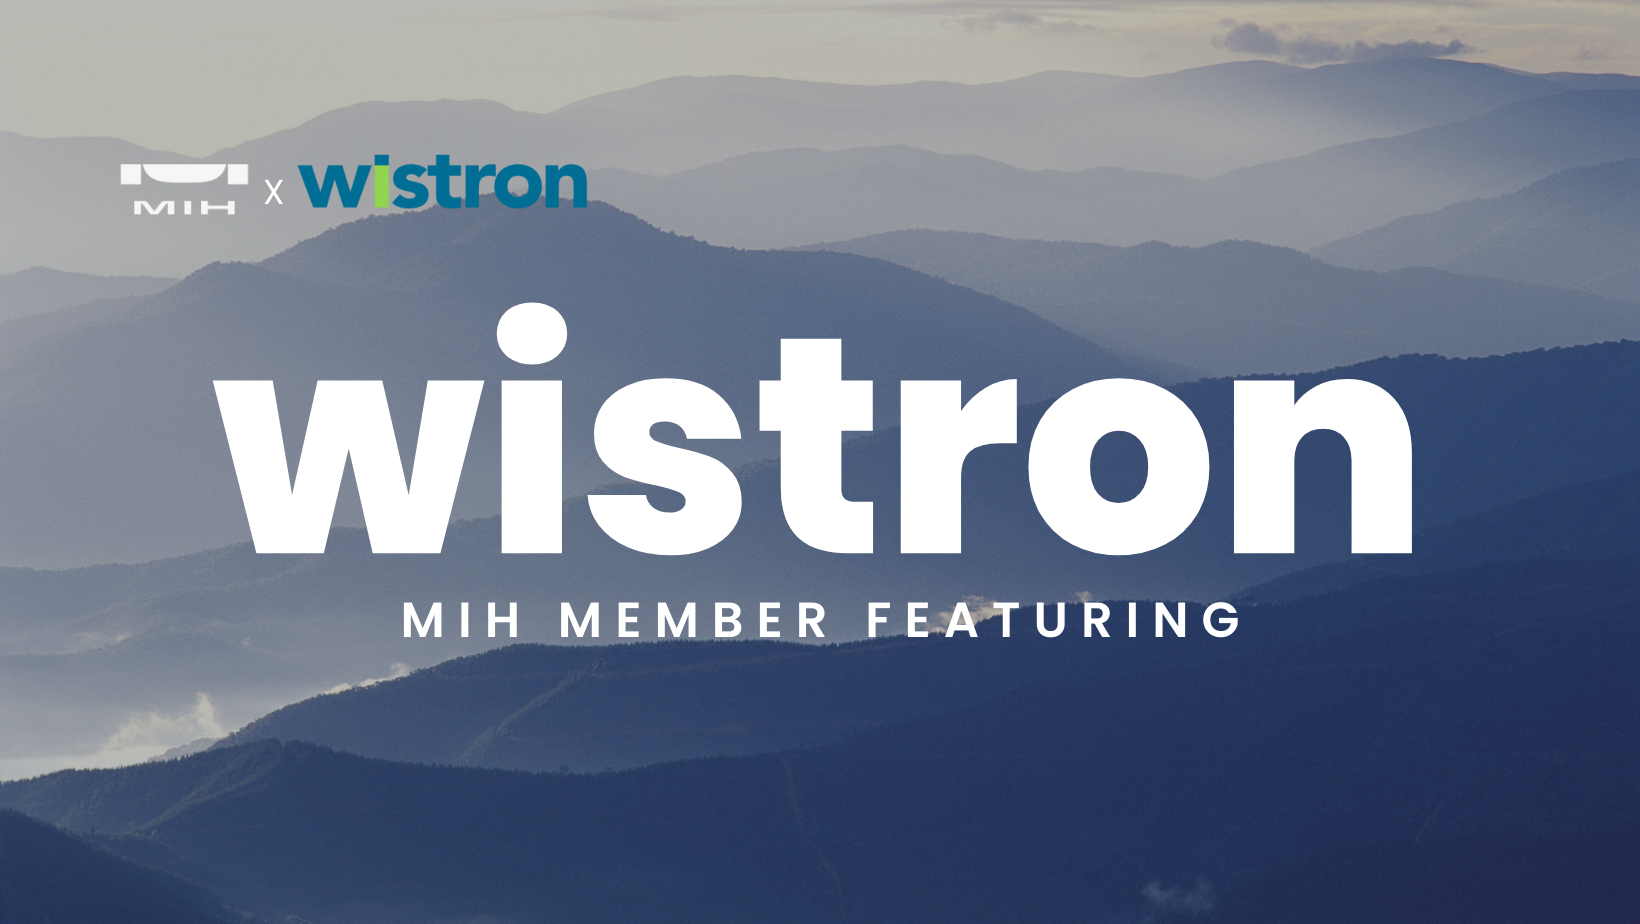 Wistron Corporation-MIH Member Featuring